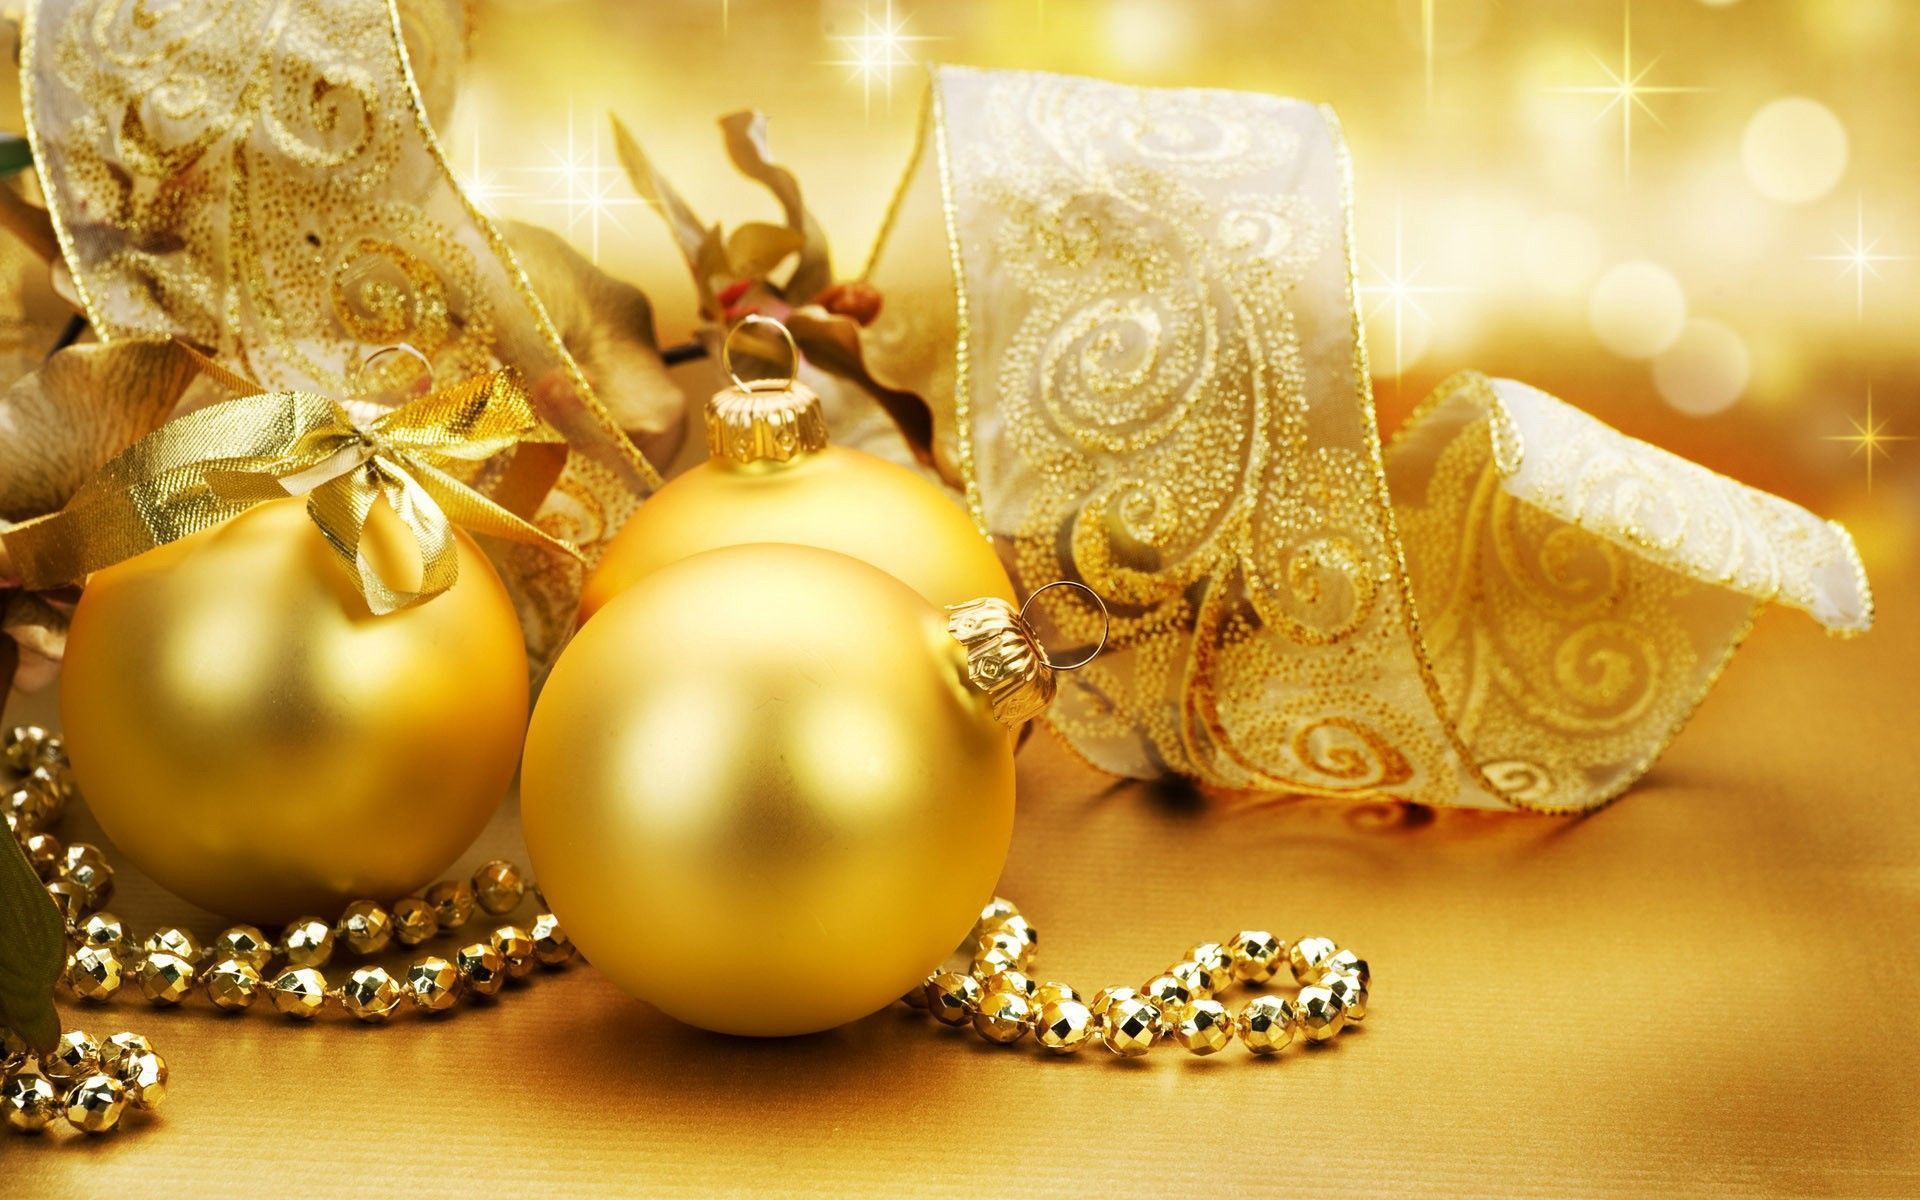 2015 Christmas hd background - wallpapers, images, photos, pictures |